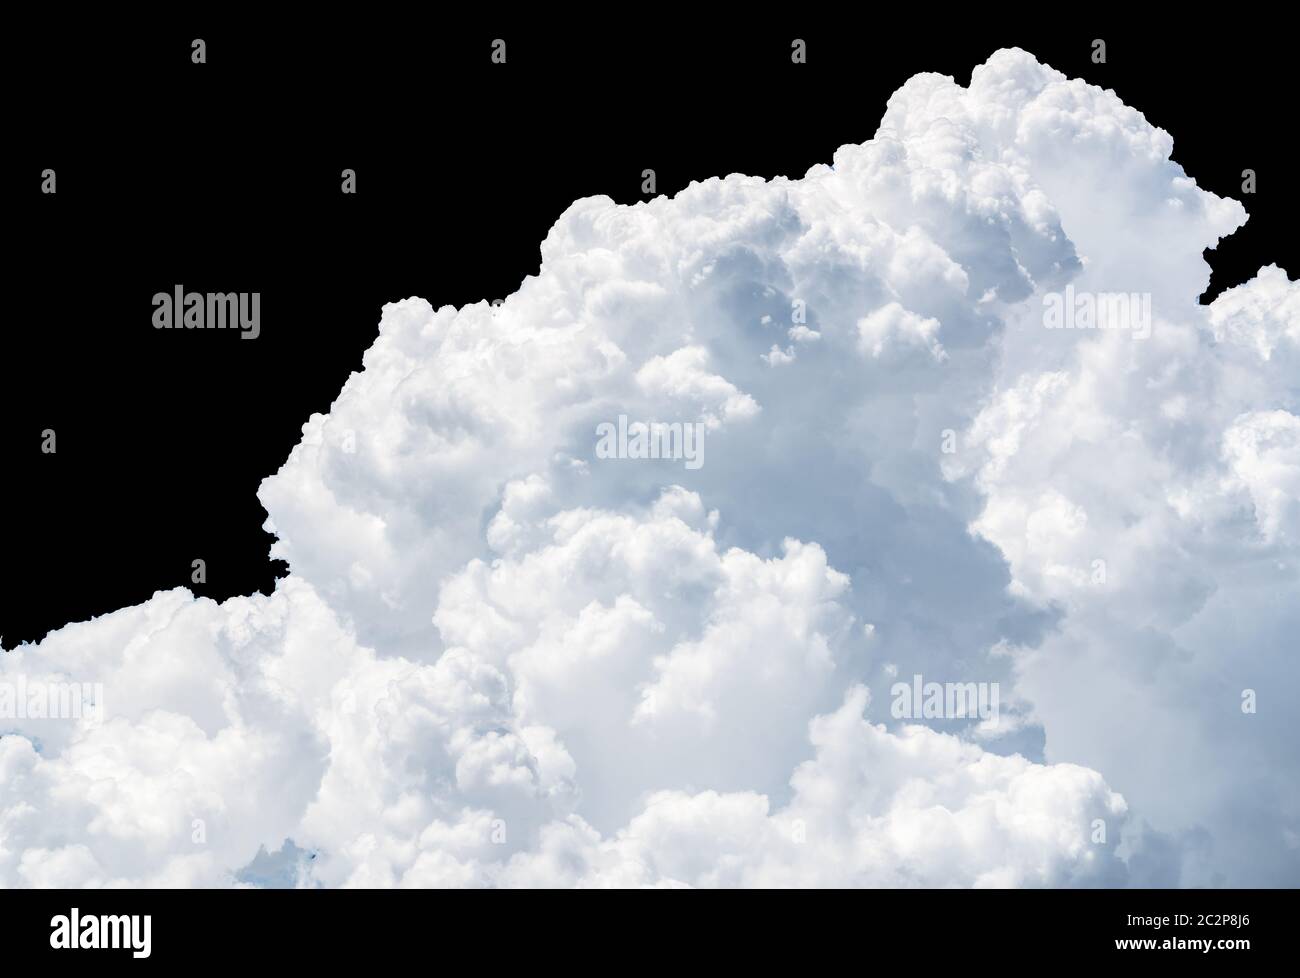 Pure white cumulus clouds on black background. Cloudscape background. White fluffy clouds on dark background. Soft cotton feel of white clouds texture Stock Photo